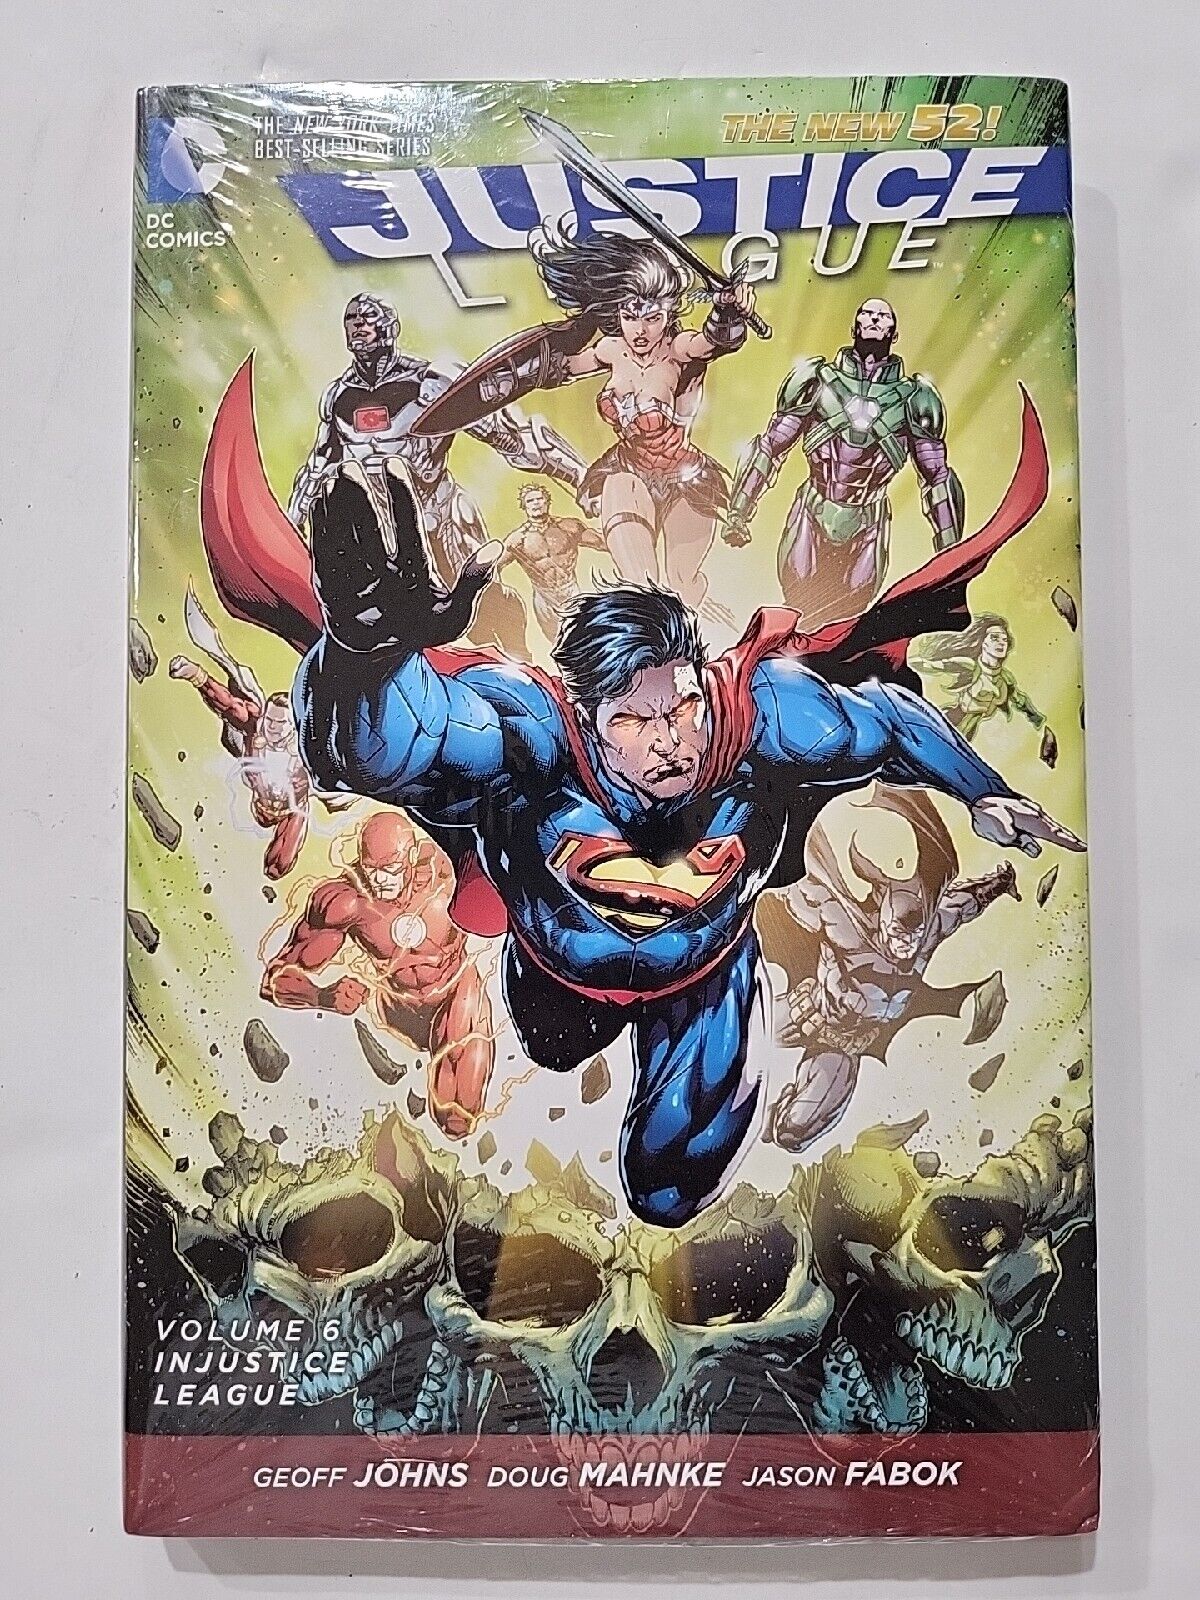 Justice League Vol. 6 Injustice League by Geoff Johns 2015 Hardcover The New 52